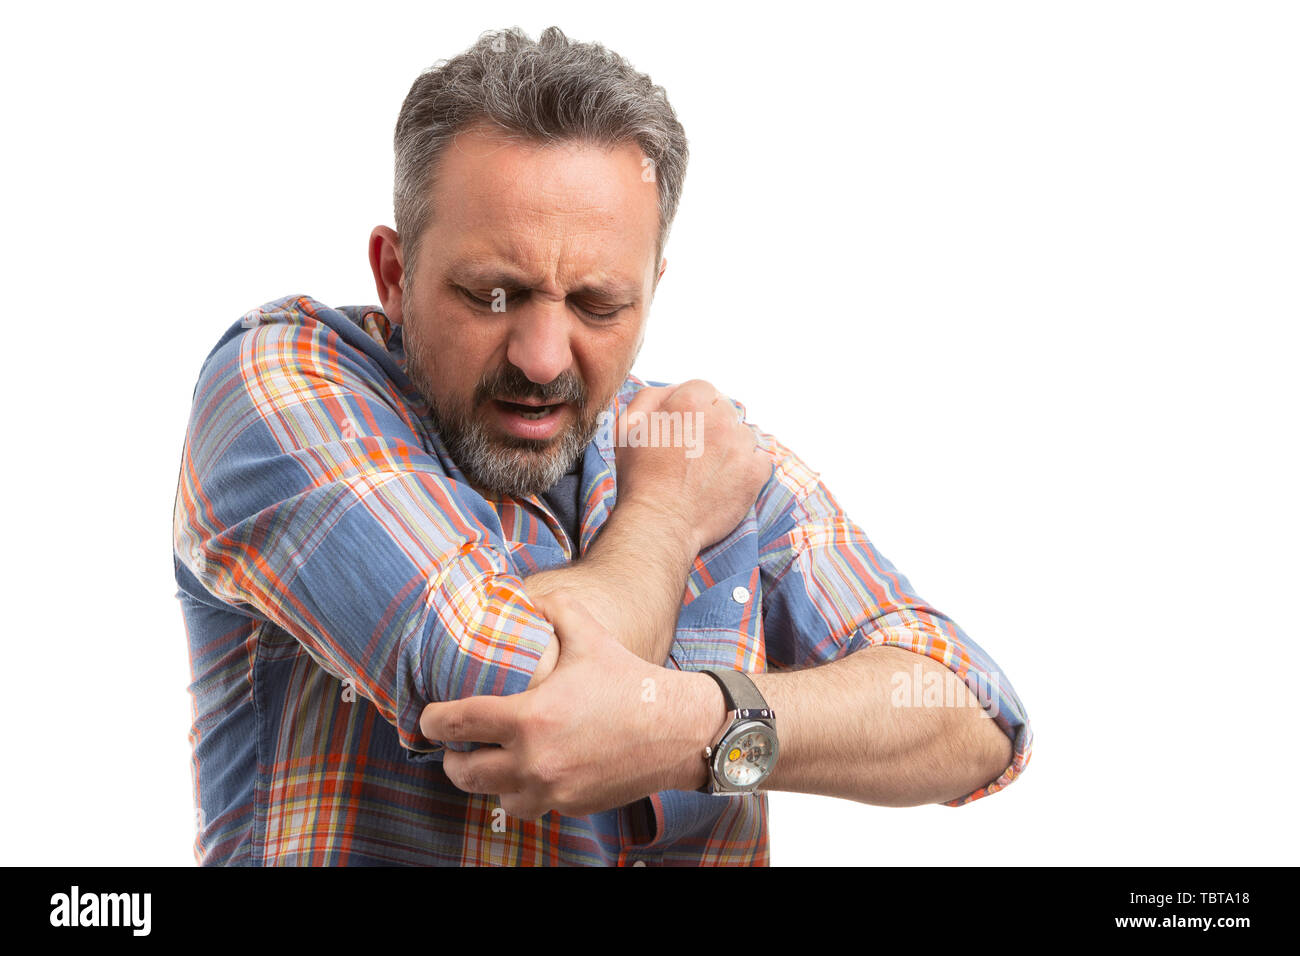 Man touching painful elbow with hurting expression as physical effort concept isolated on white background Stock Photo